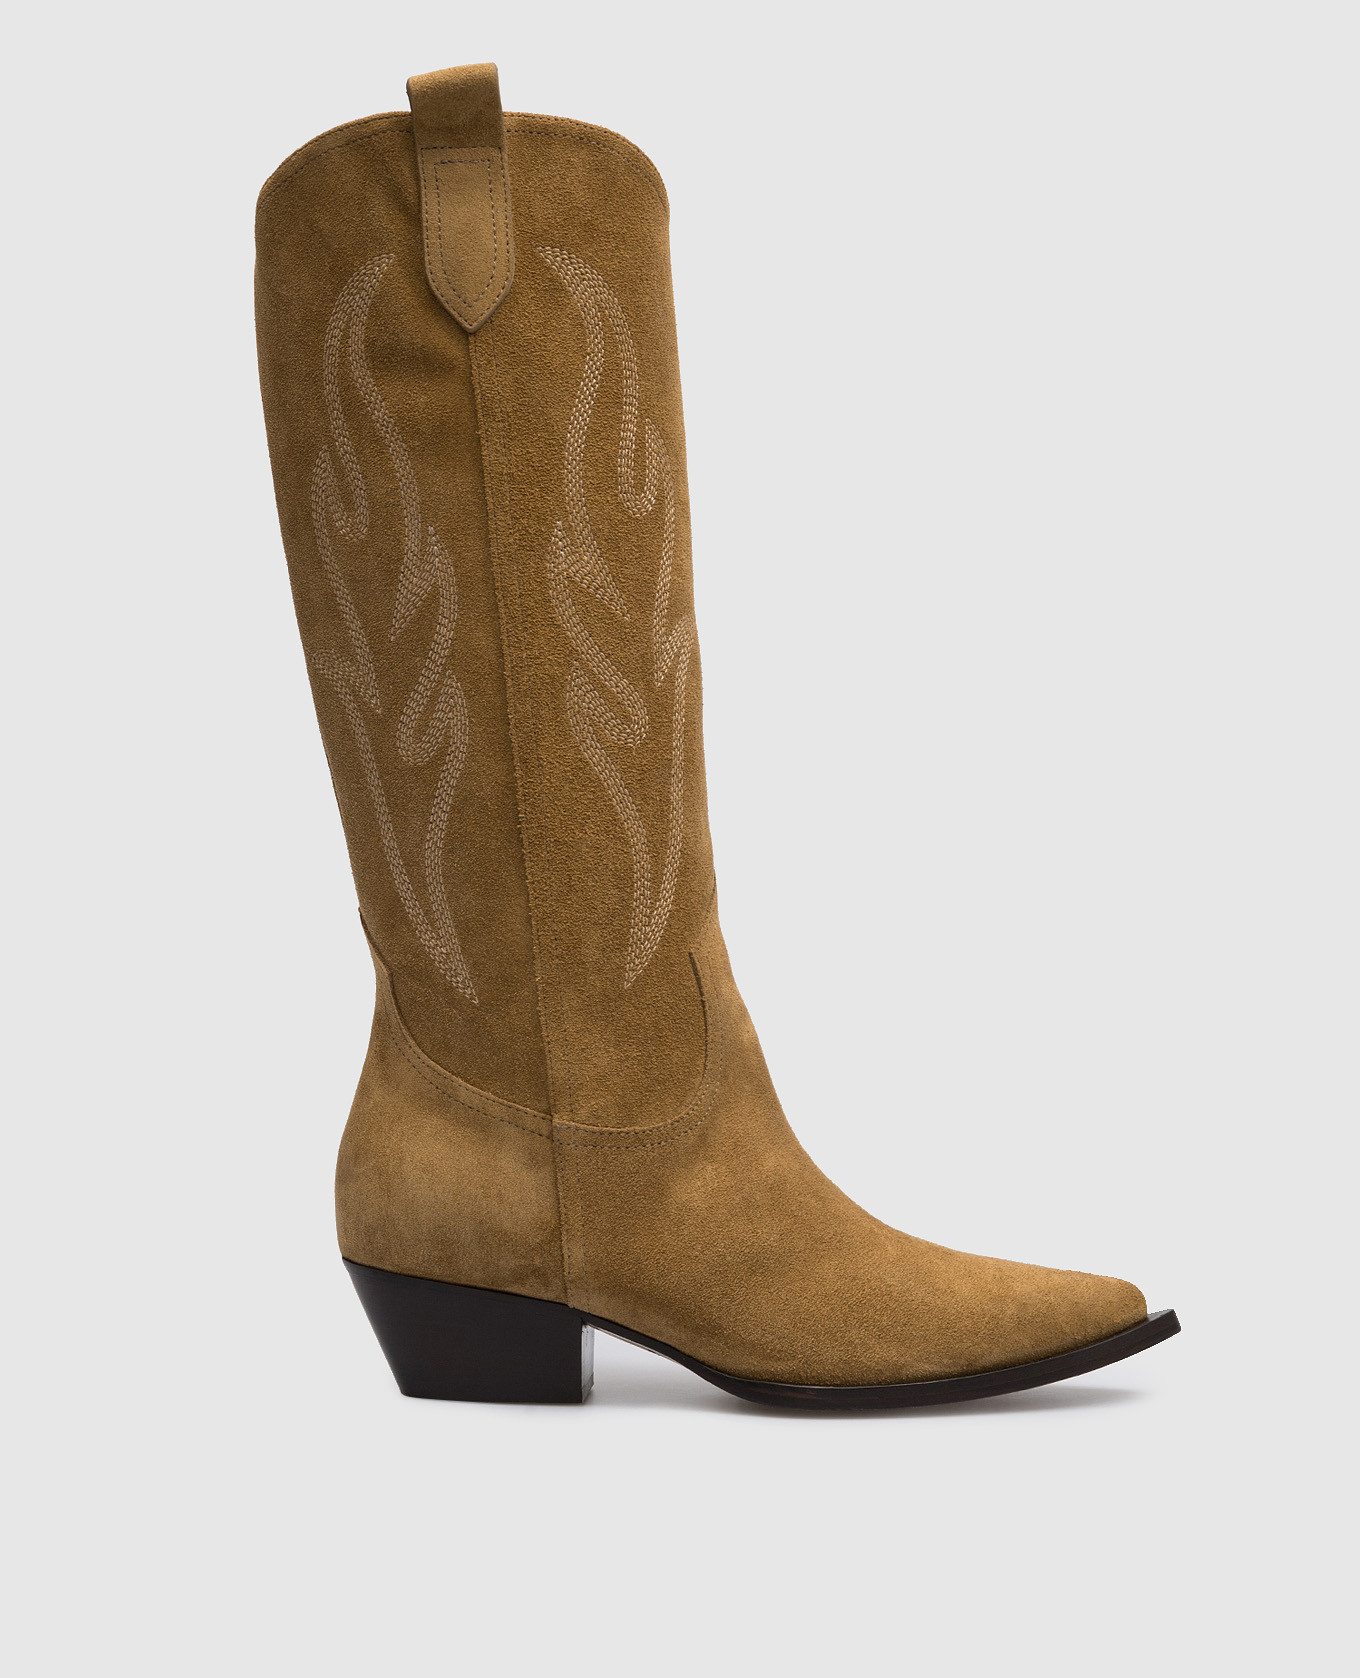 Brown suede Dallas boots with embroidery